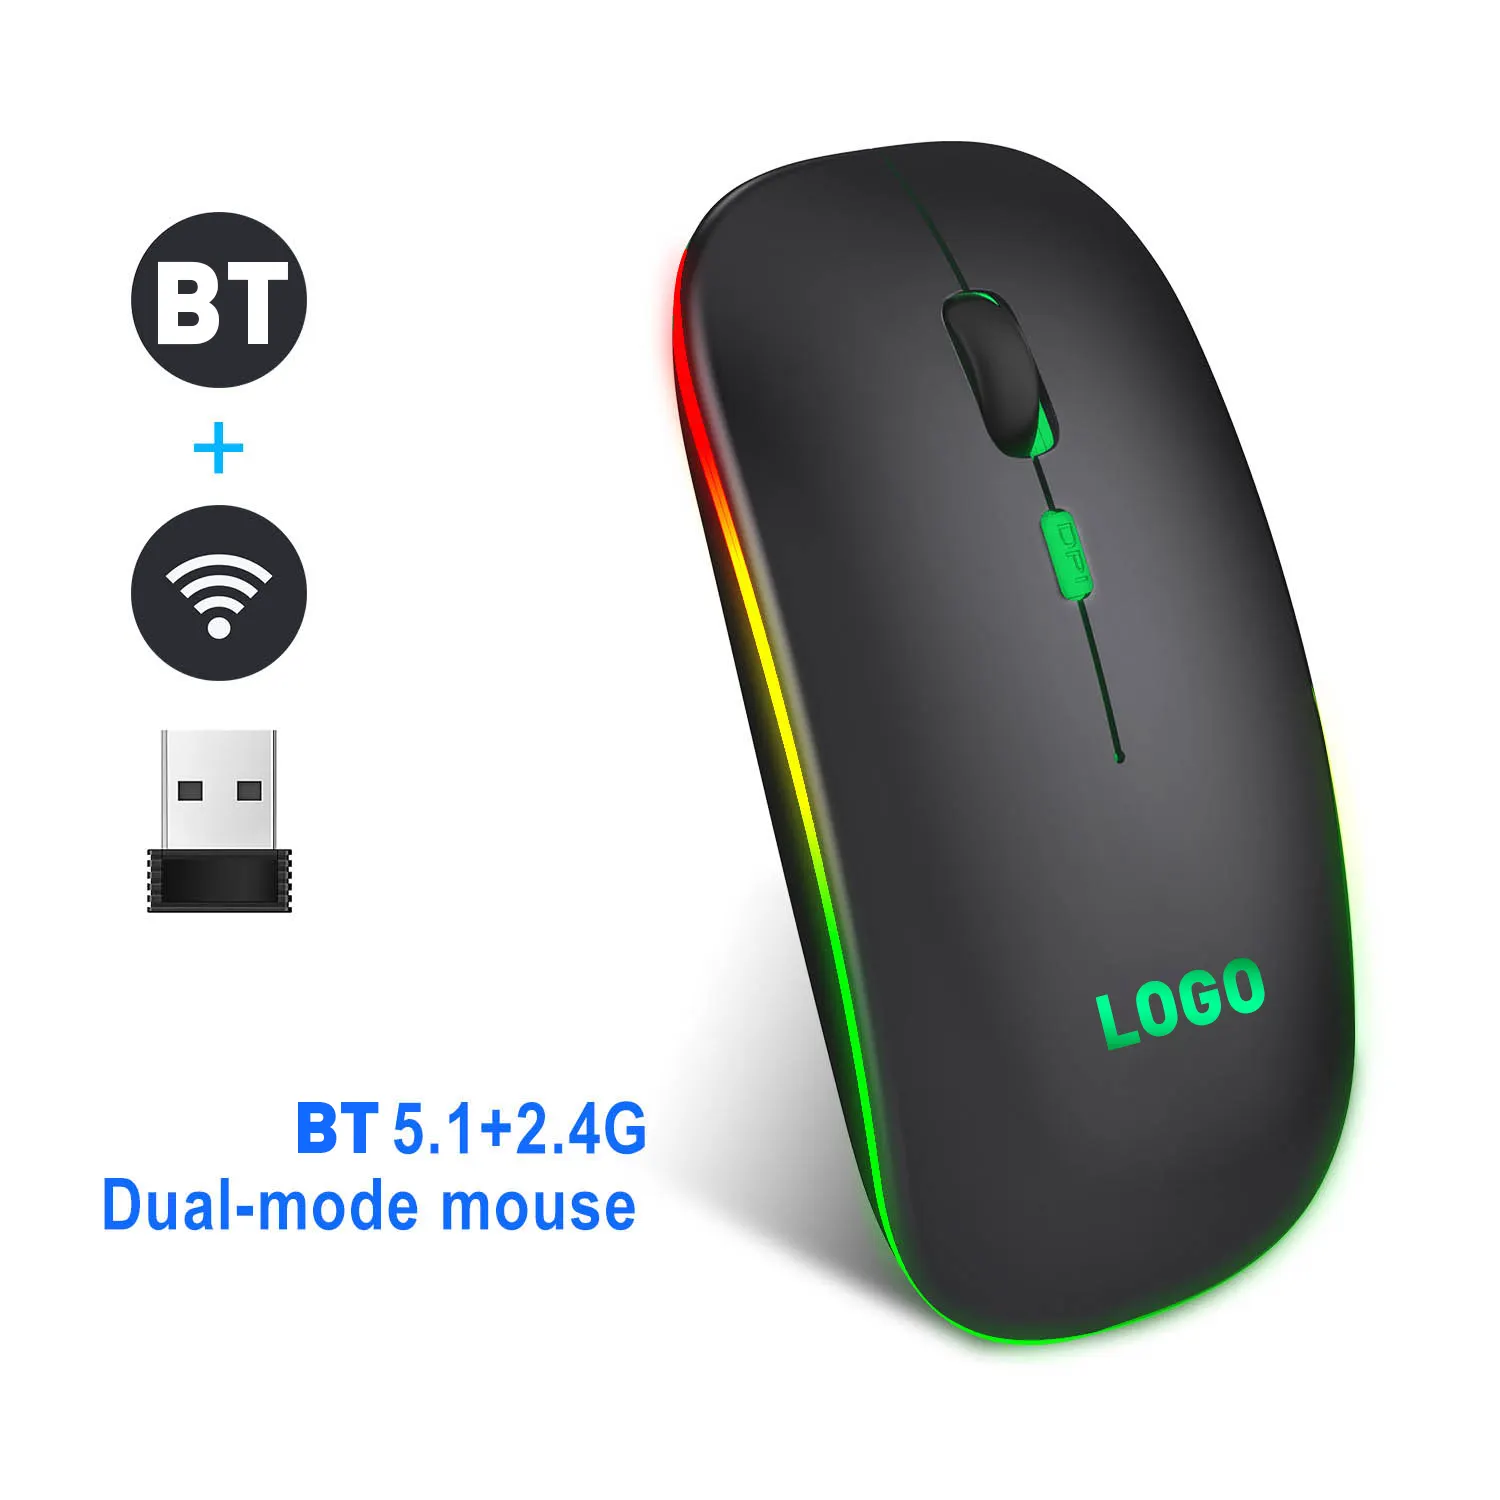 Hot Products Wireless New Optical Mouse 2.4G 1600DPI Cordless Game Mouse for Office and Gaming Use